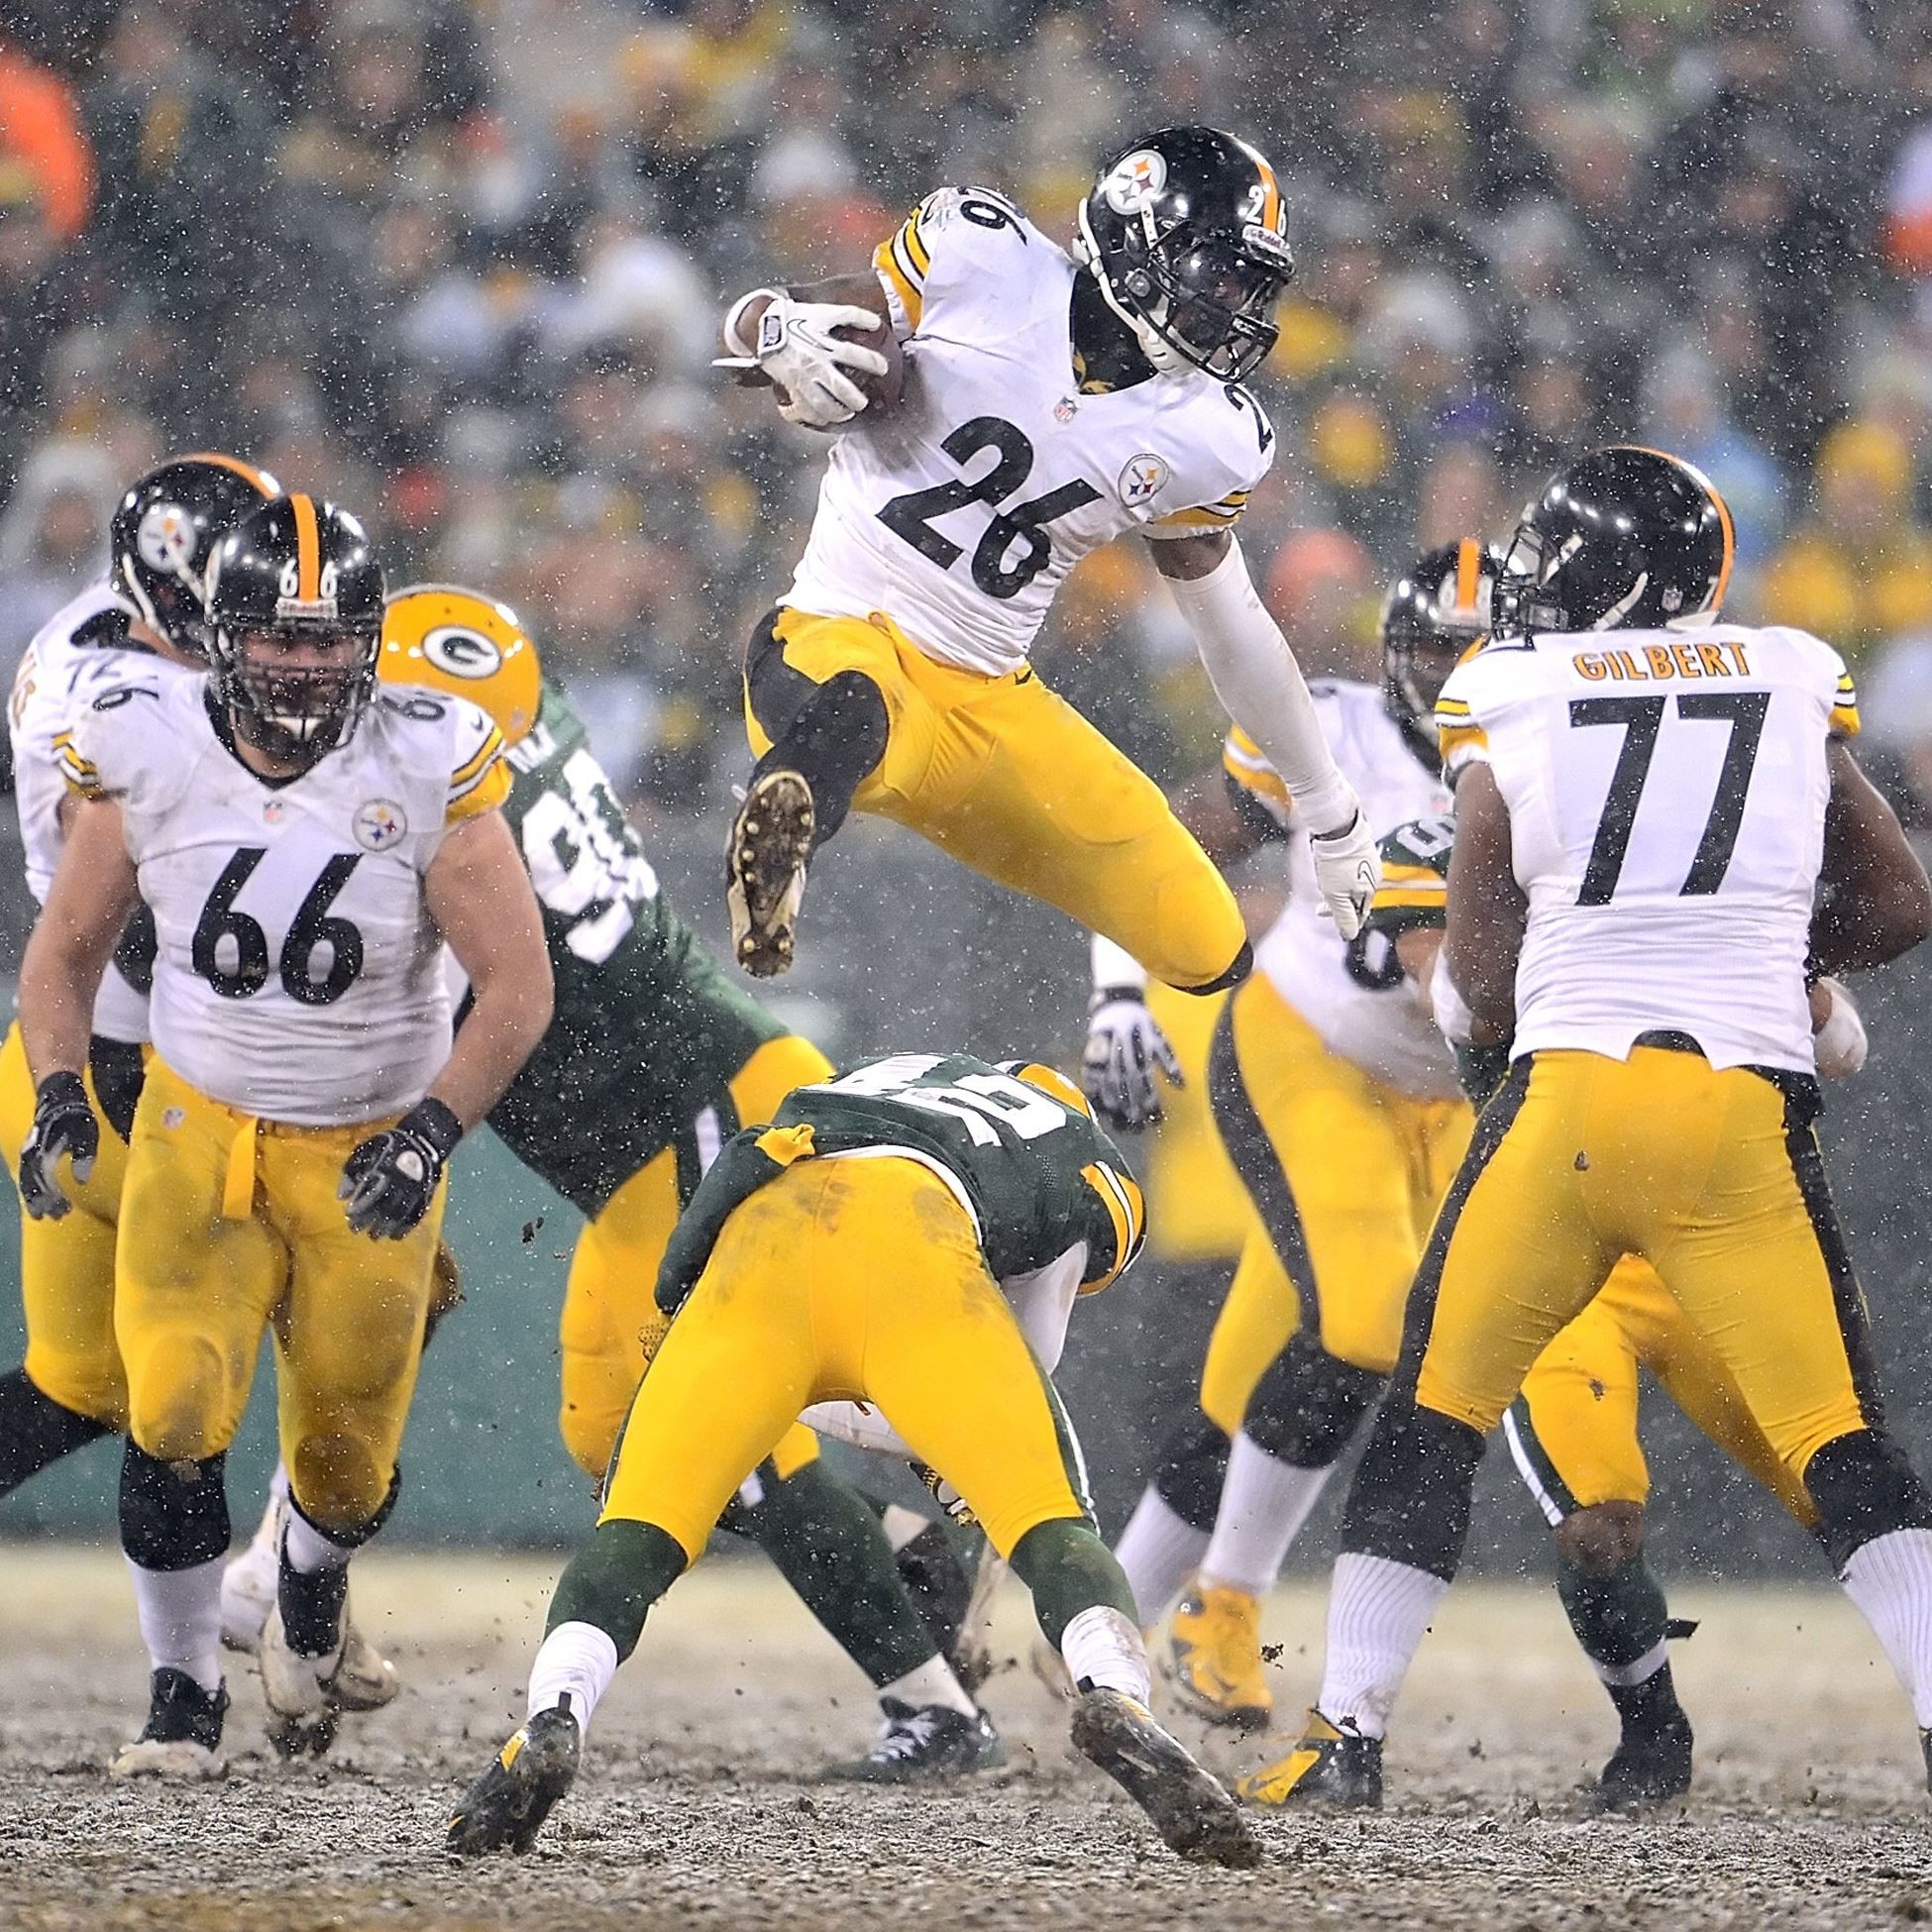 Steelers Le'Veon Bell leaps over Packers Morgan Burnett for first down  yardage in the third quarter at Lambeau Field.